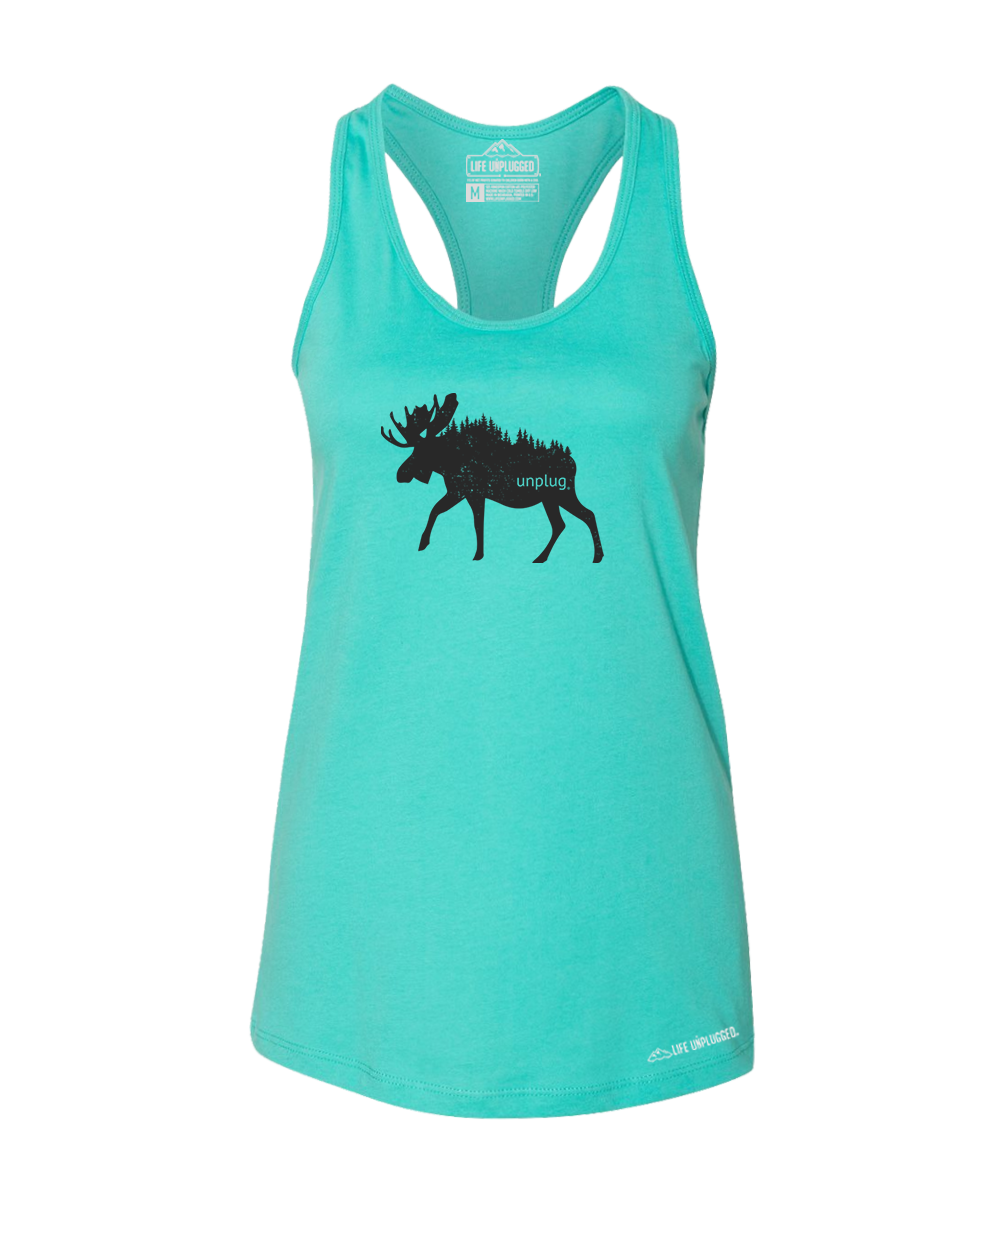 Moose In The Trees Premium Women's Relaxed Fit Racerback Tank Top - Life Unplugged